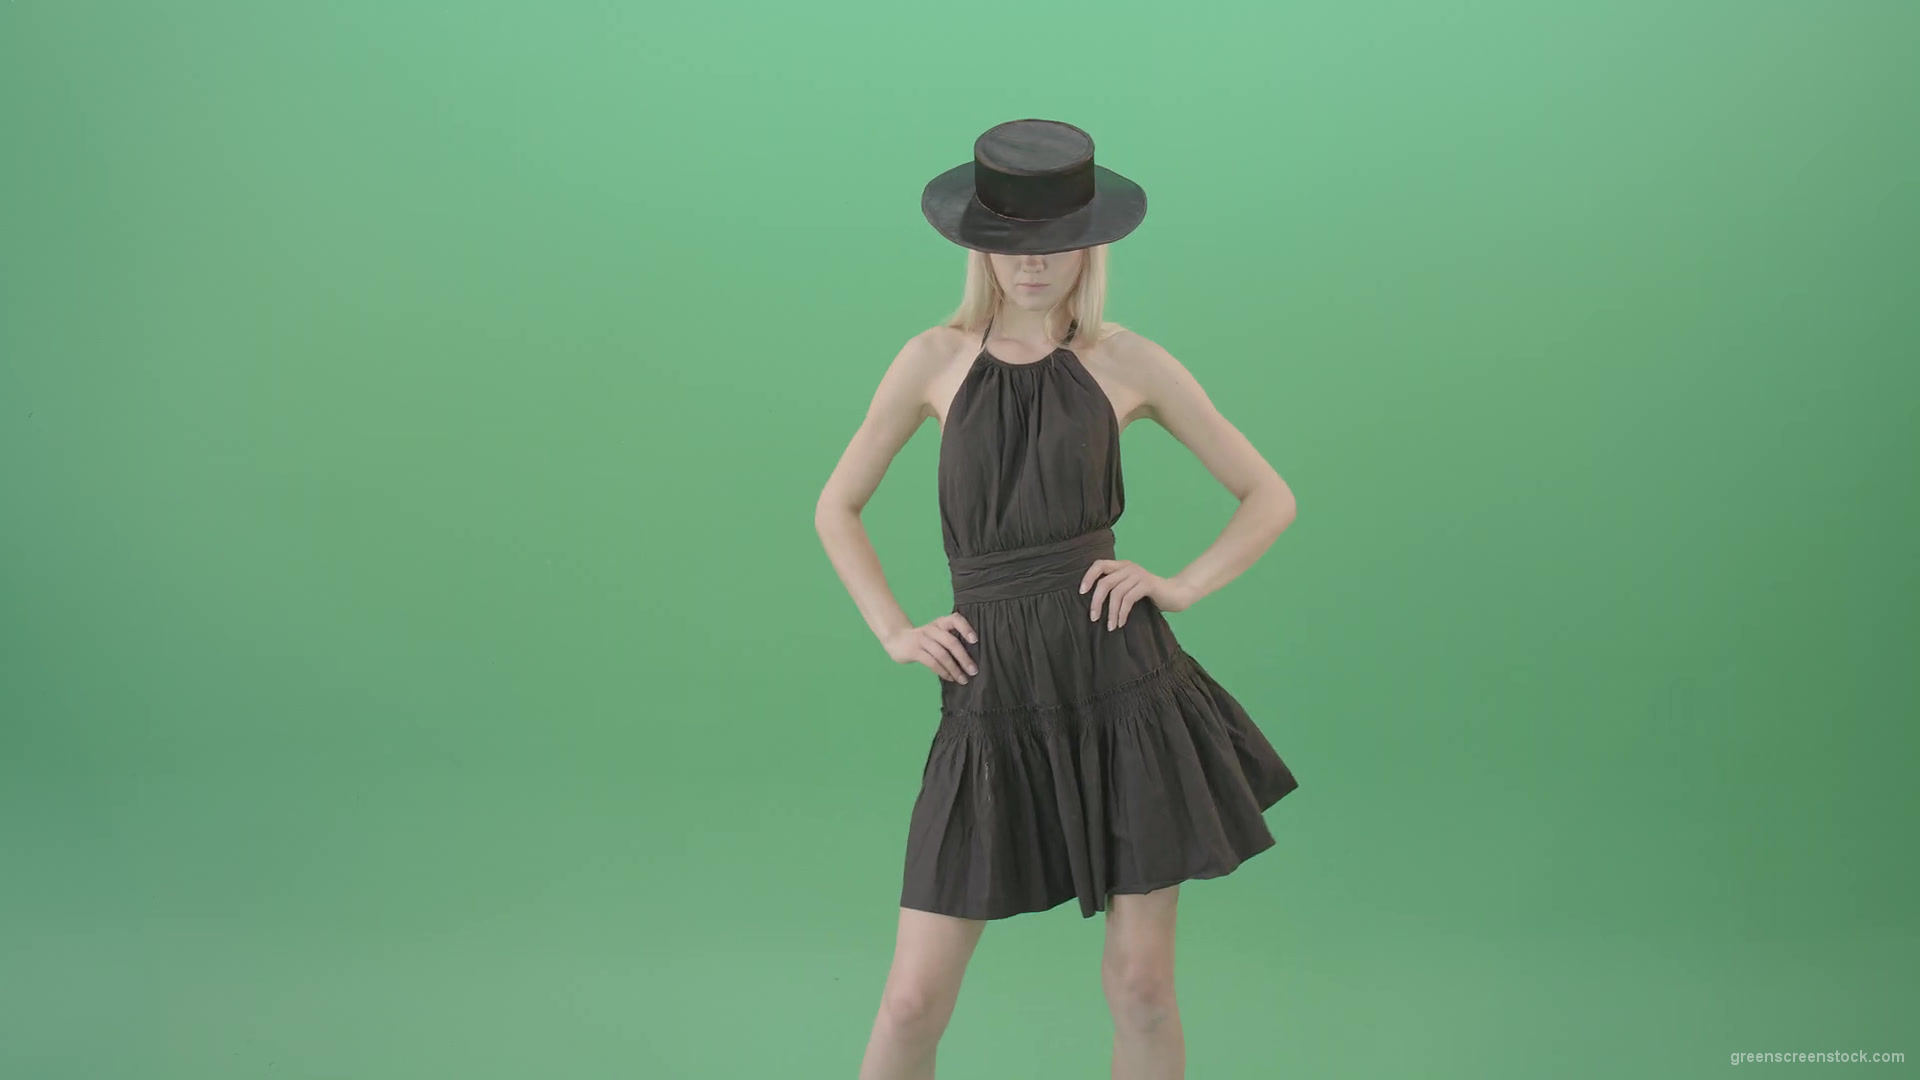 Elegant-girl-in-black-dress-and-hat-chilling-dance-isolated-on-green-screen-4K-Video-Footage-1920_006 Green Screen Stock